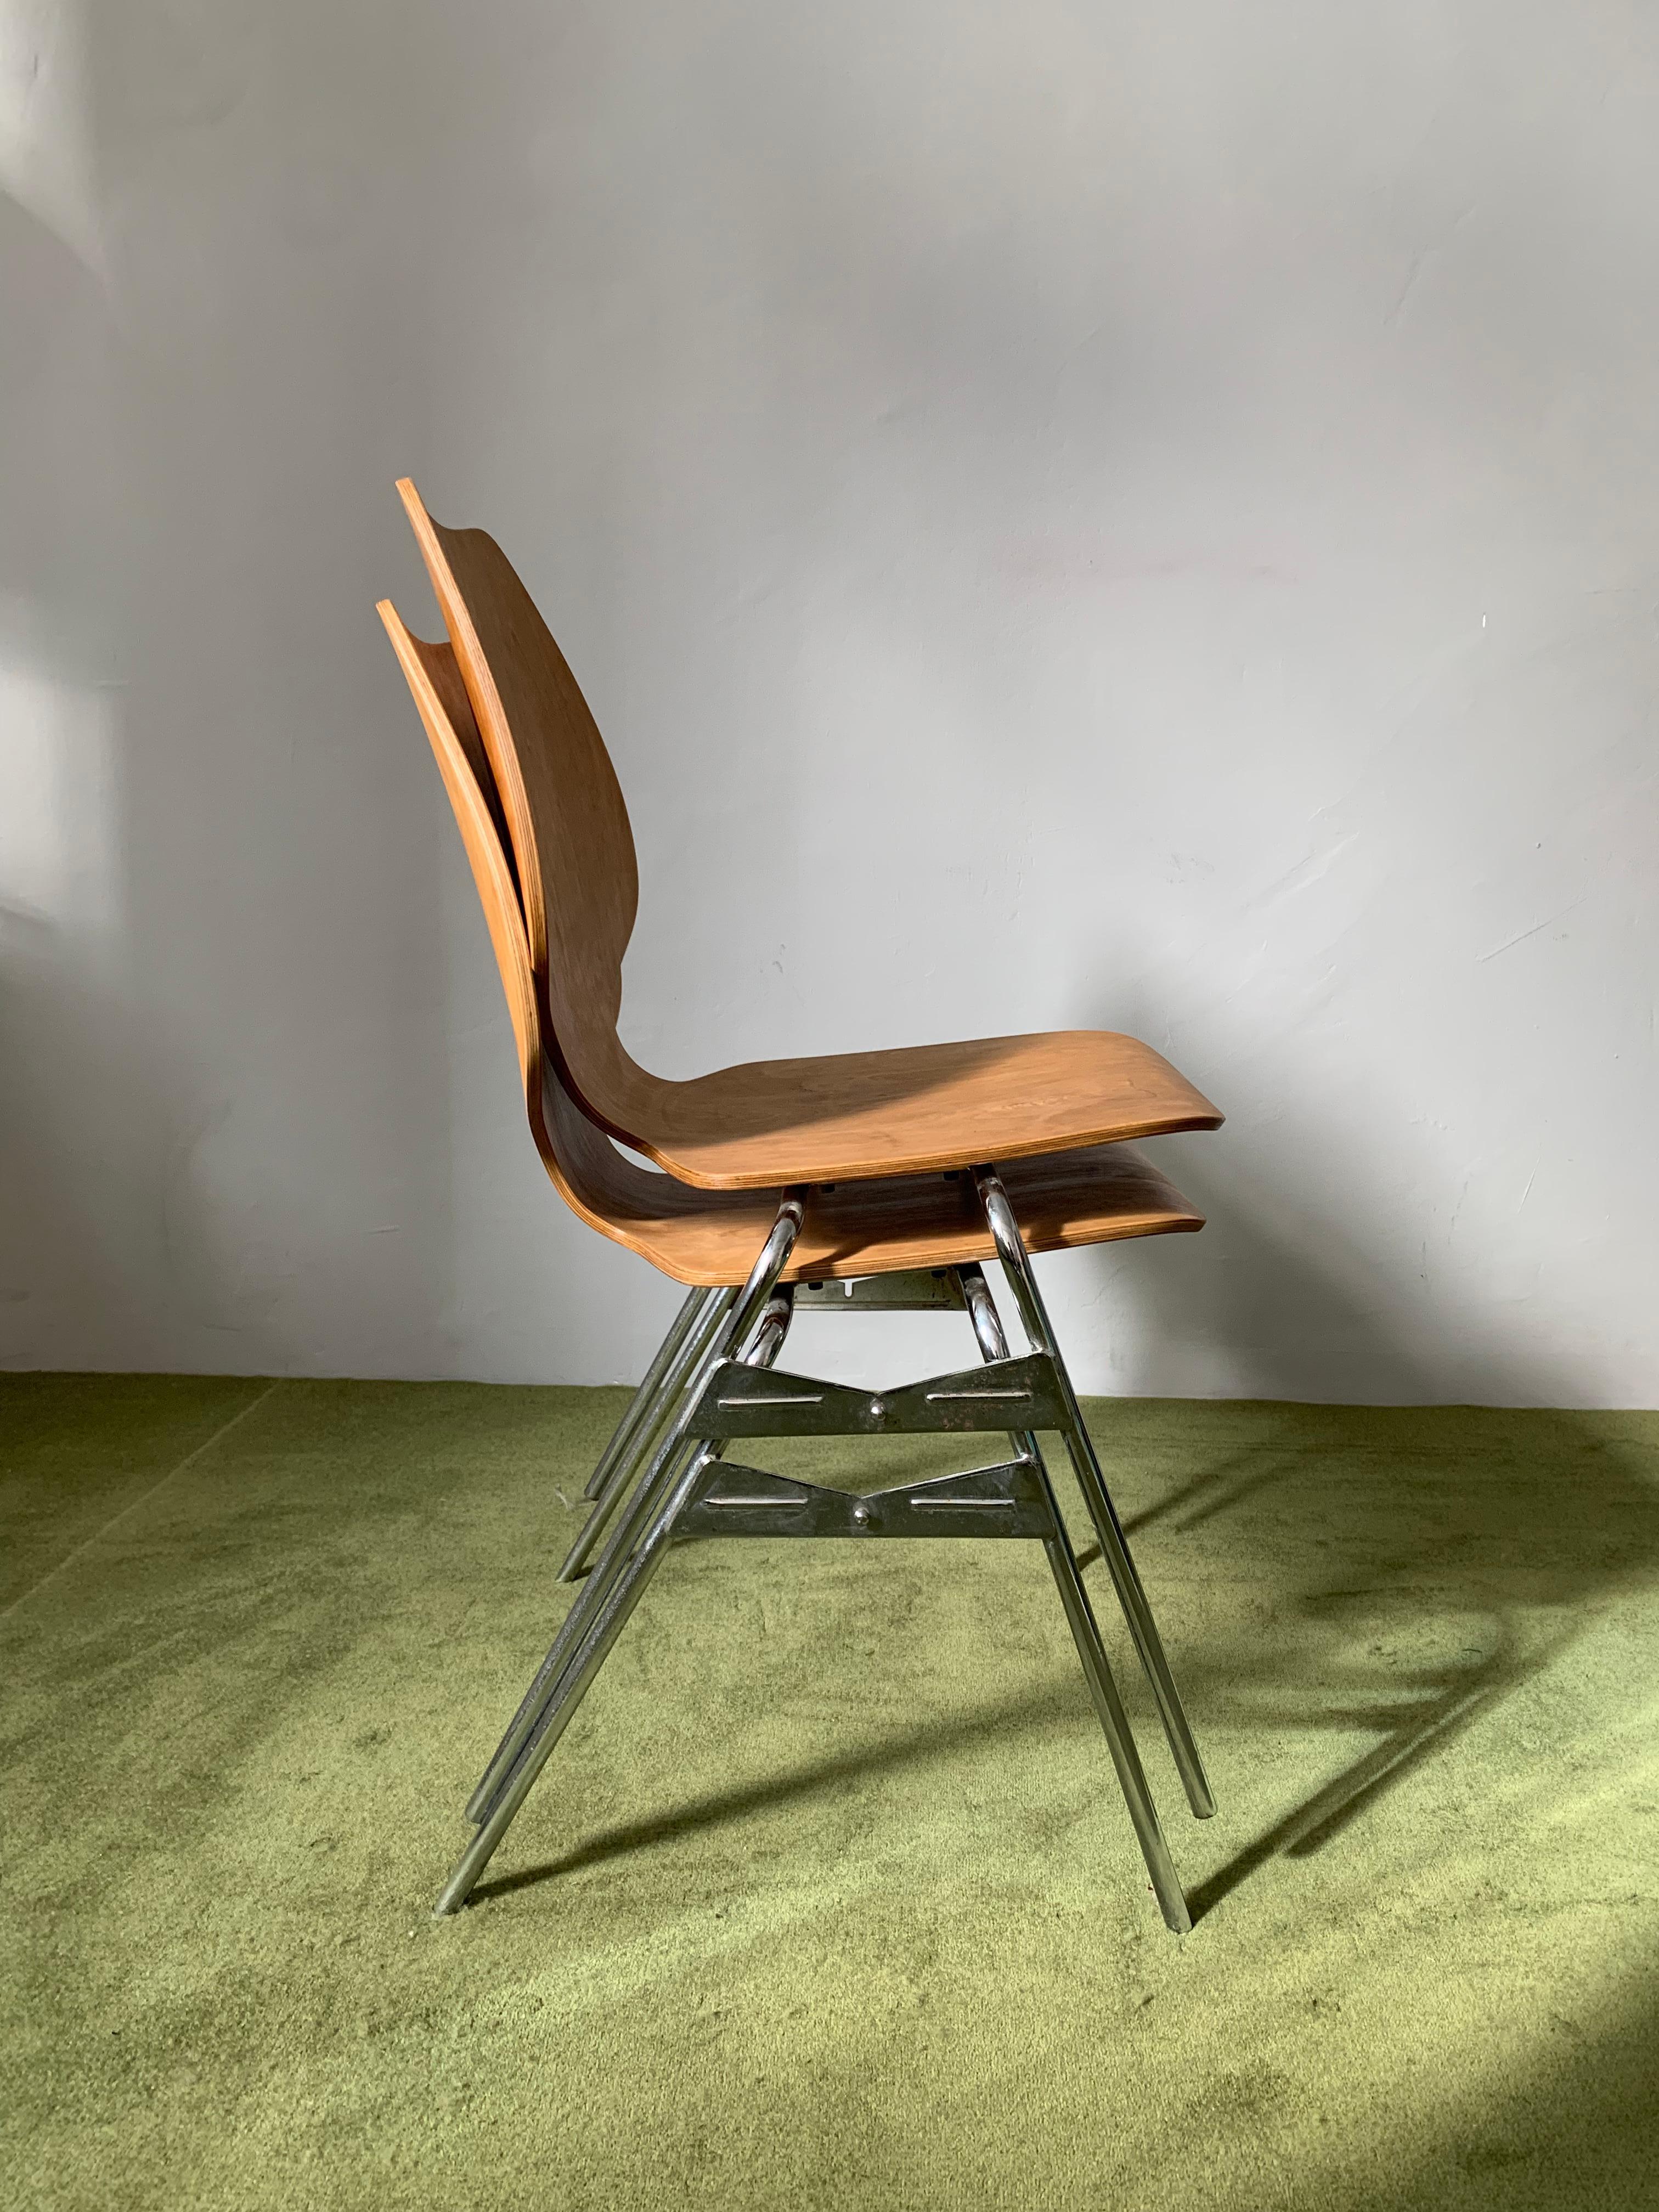 Vintage Swiss Industrial  Design Plywood Stacking Chair by Horgen Glarus 1960's For Sale 11